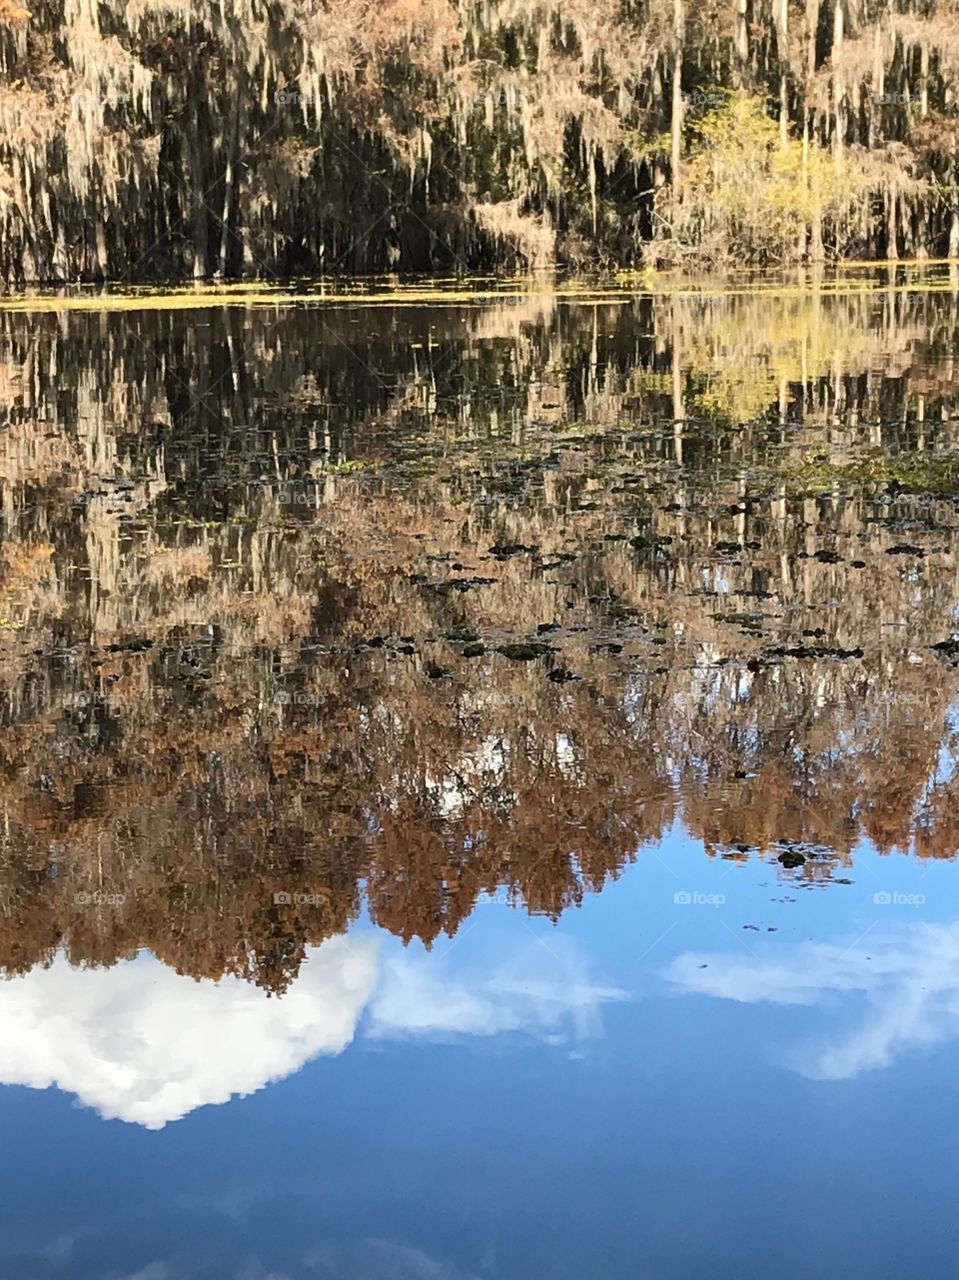 Caddo Lake Cypress Trees Reflection of Sky on Water looks upside down clouds and Spanish moss